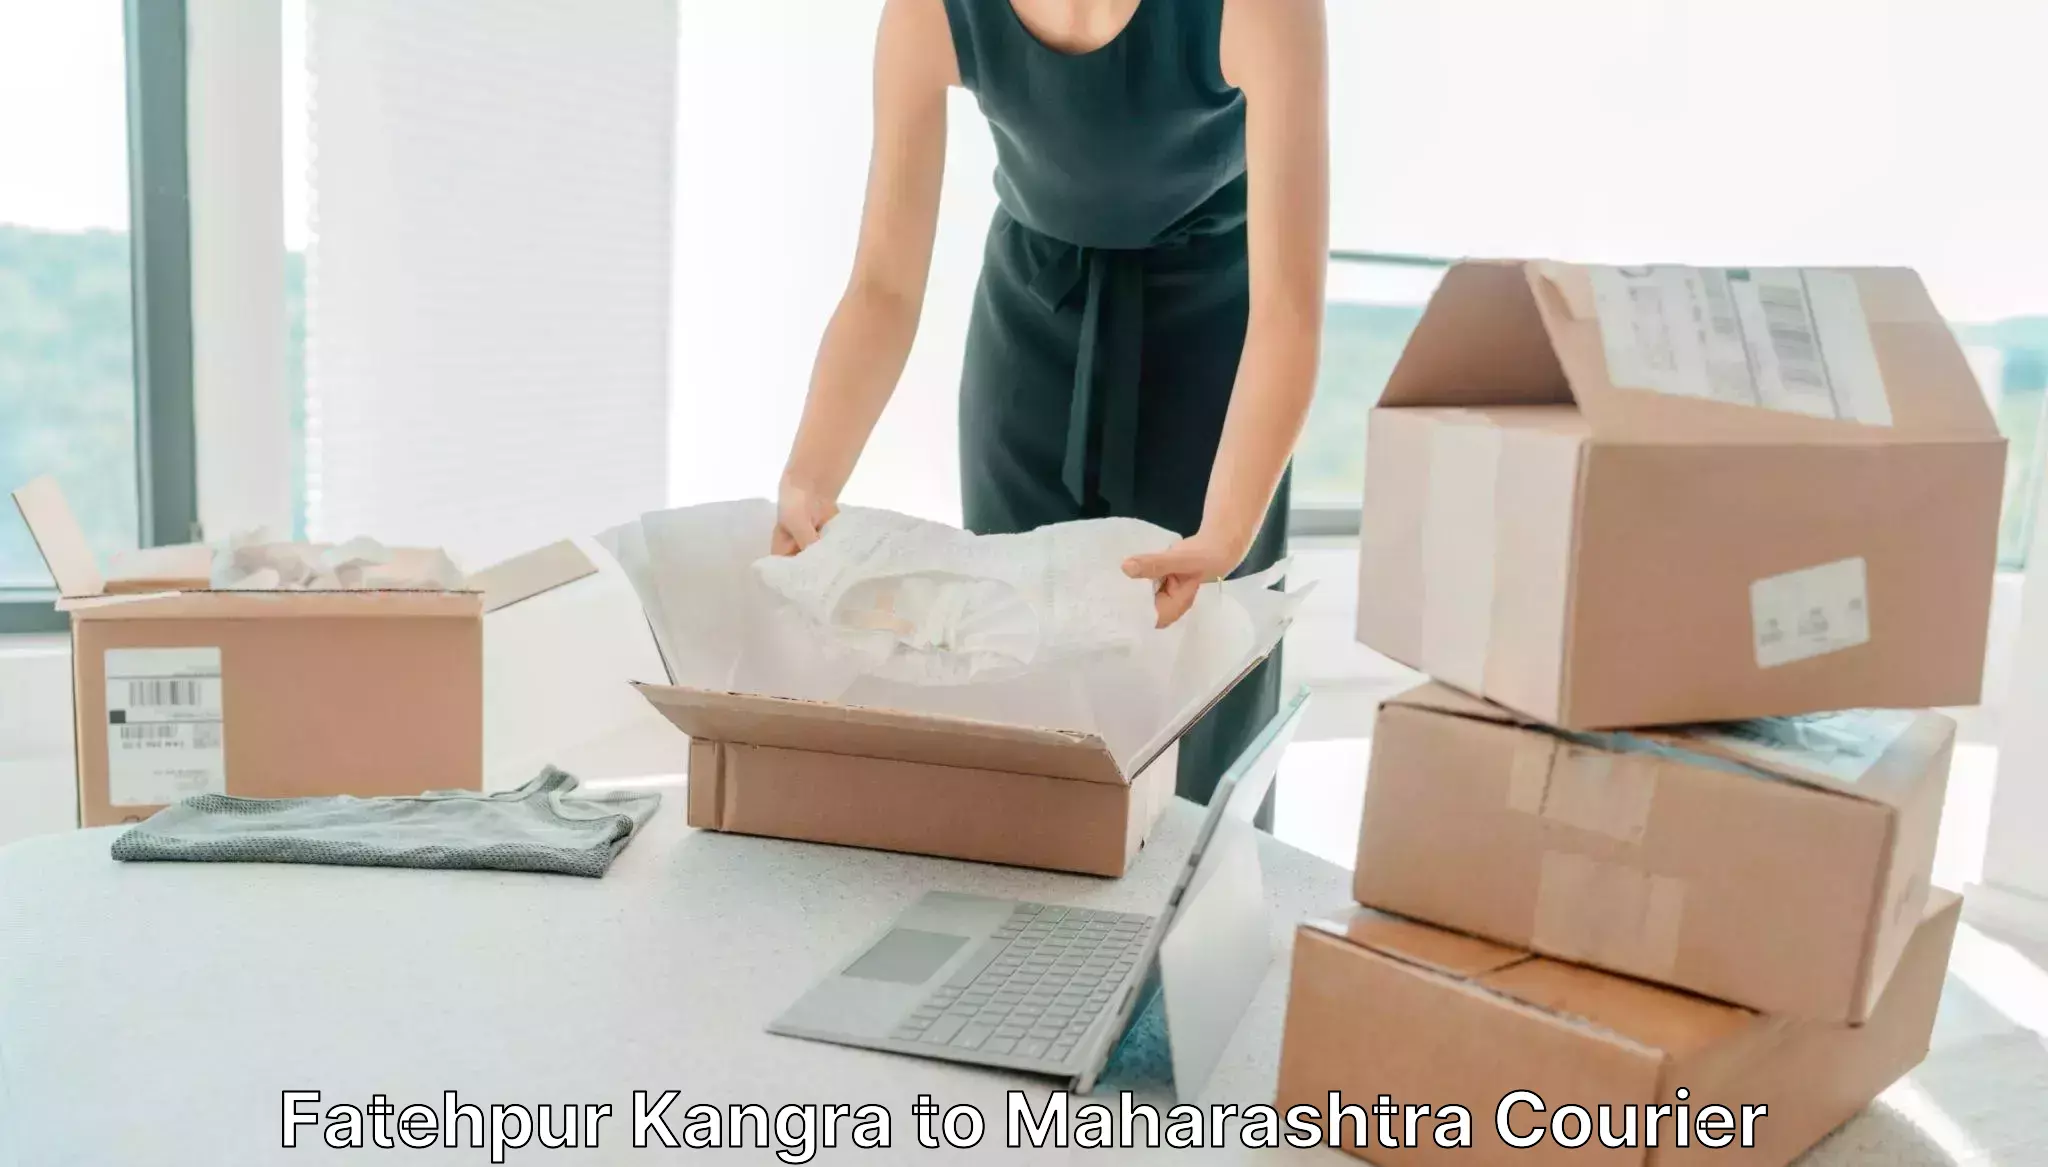 Courier service booking in Fatehpur Kangra to Aurangabad